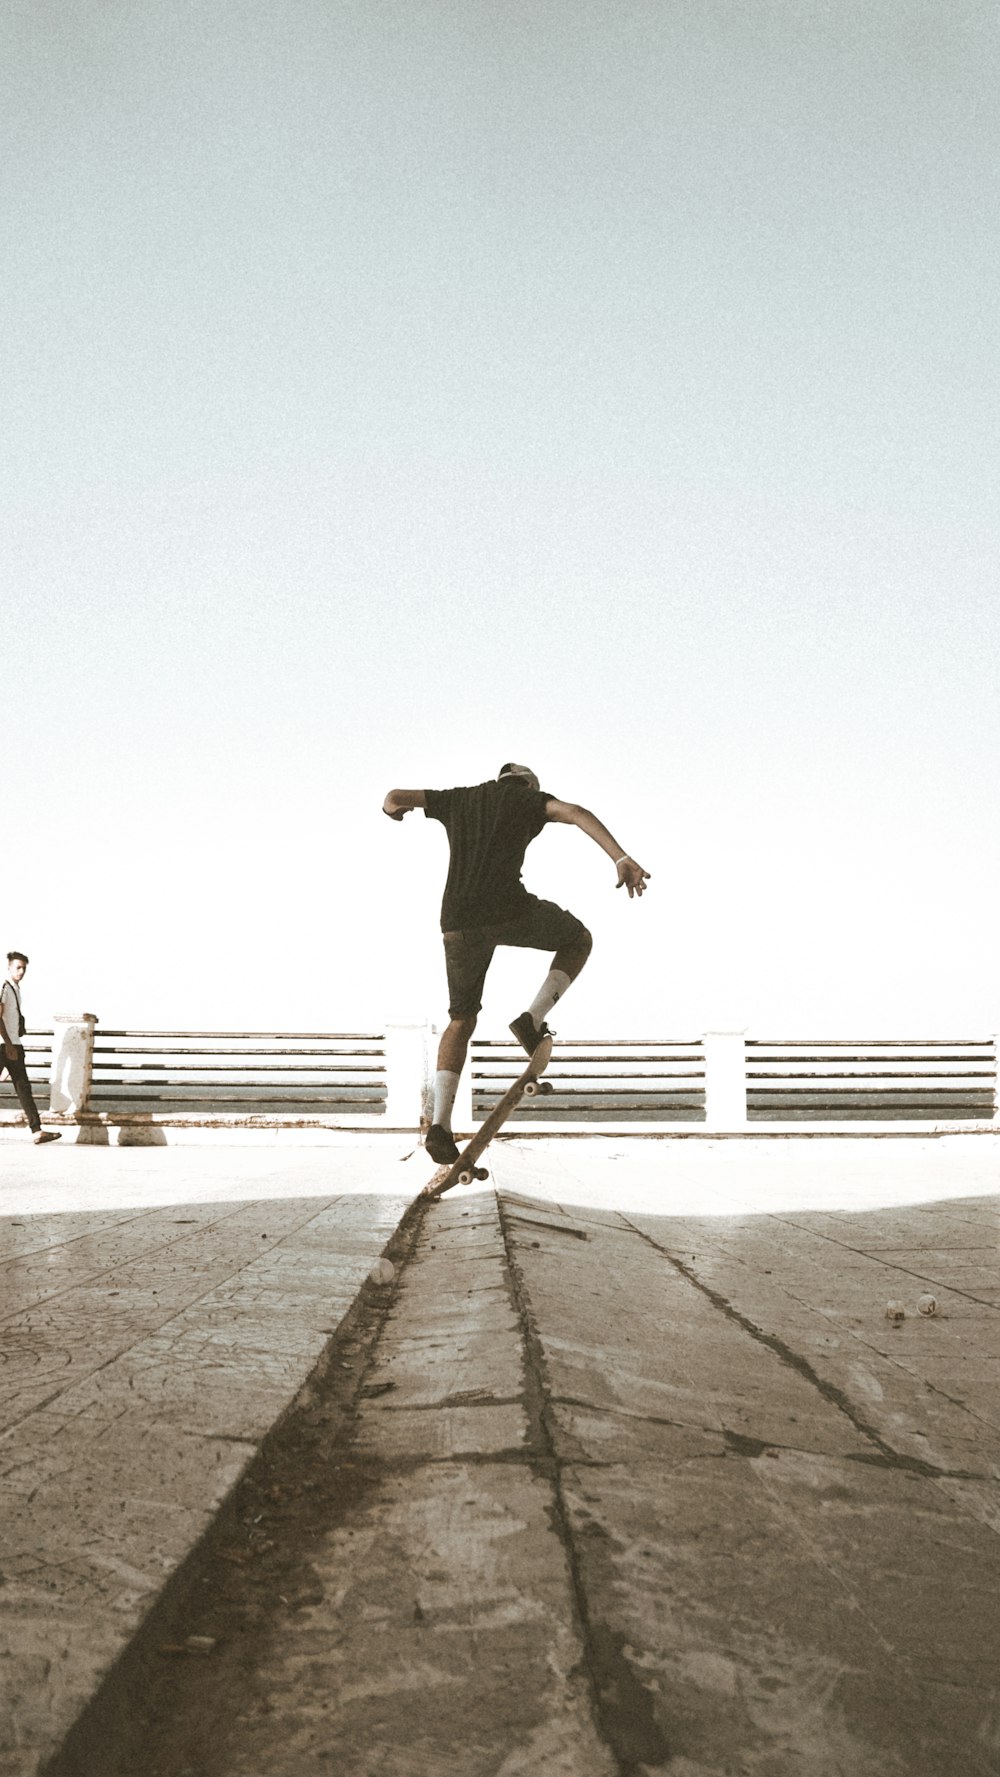 close-up photography of person doing stunt on skateboard